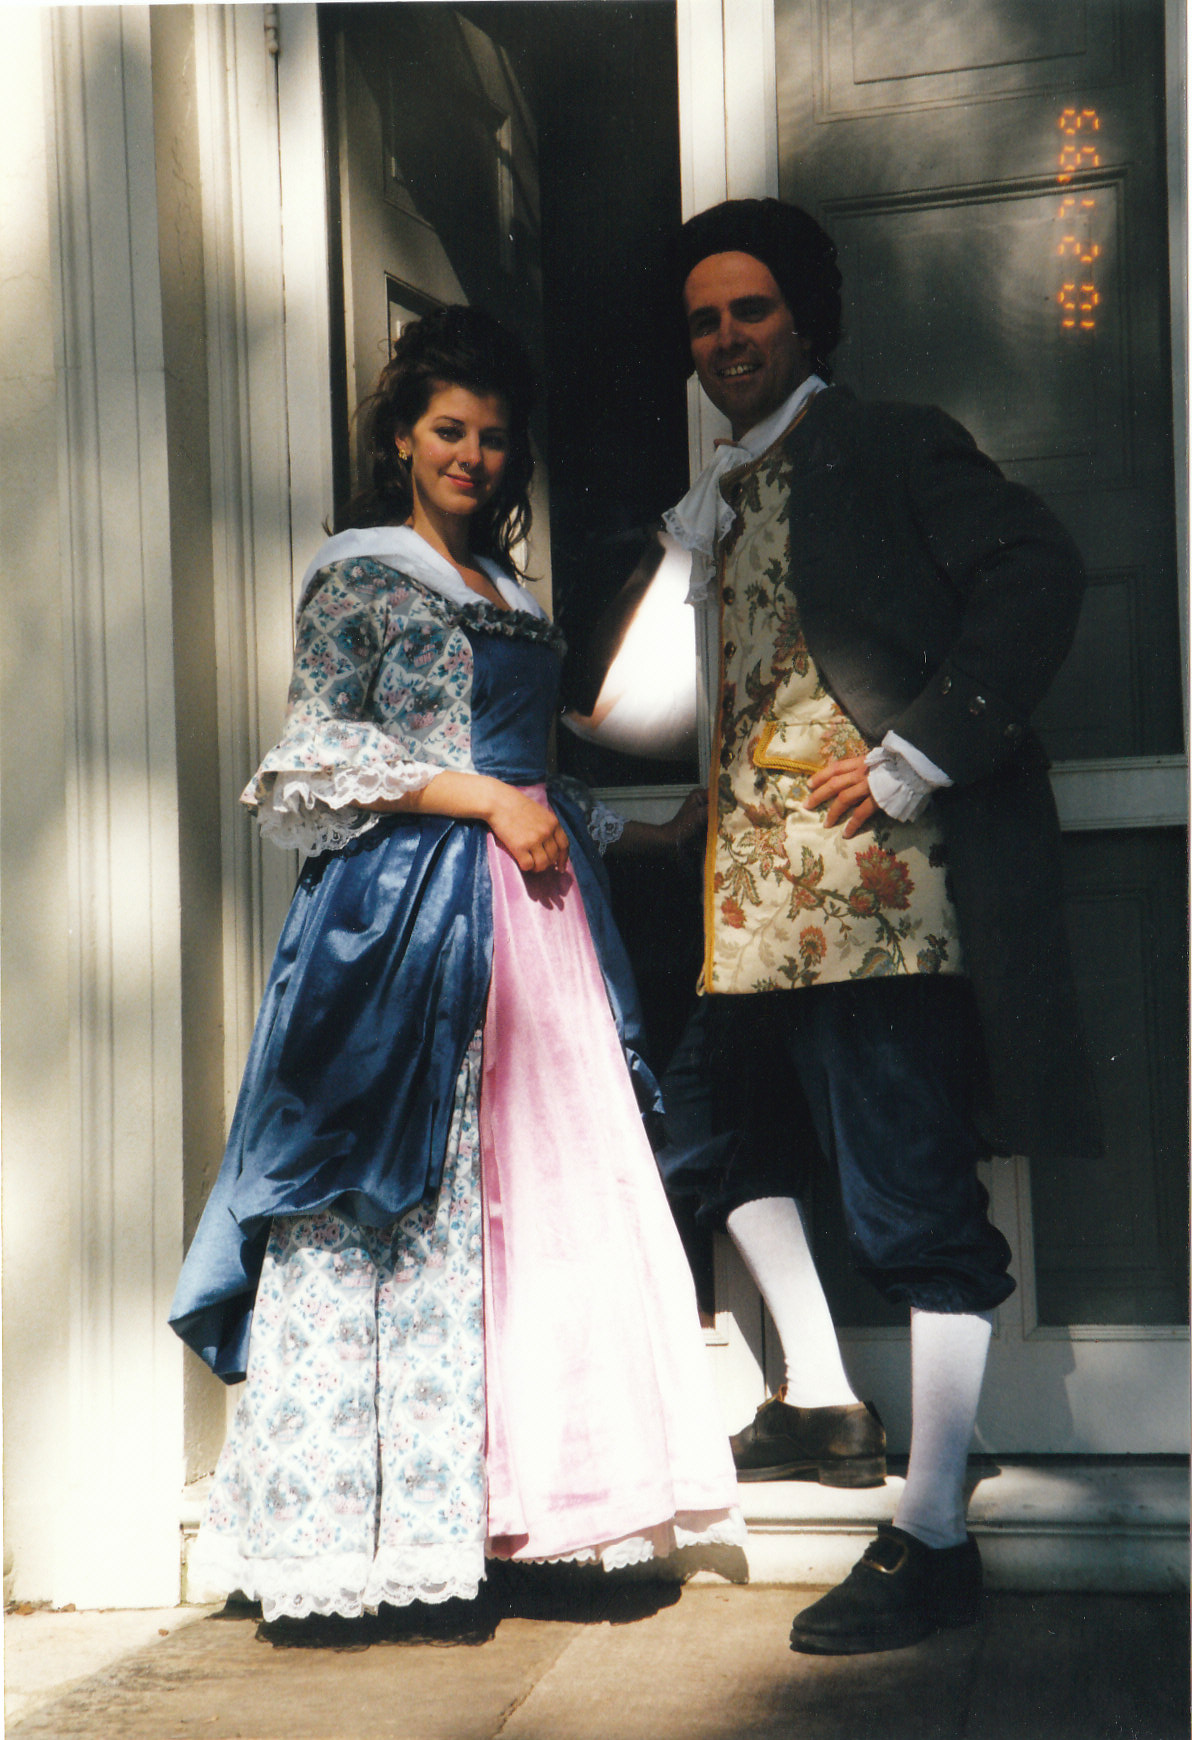 Kera O'Bryon & Scott on the set of a VIRGINIA IS FOR LOVERS commercial Oct. 1999